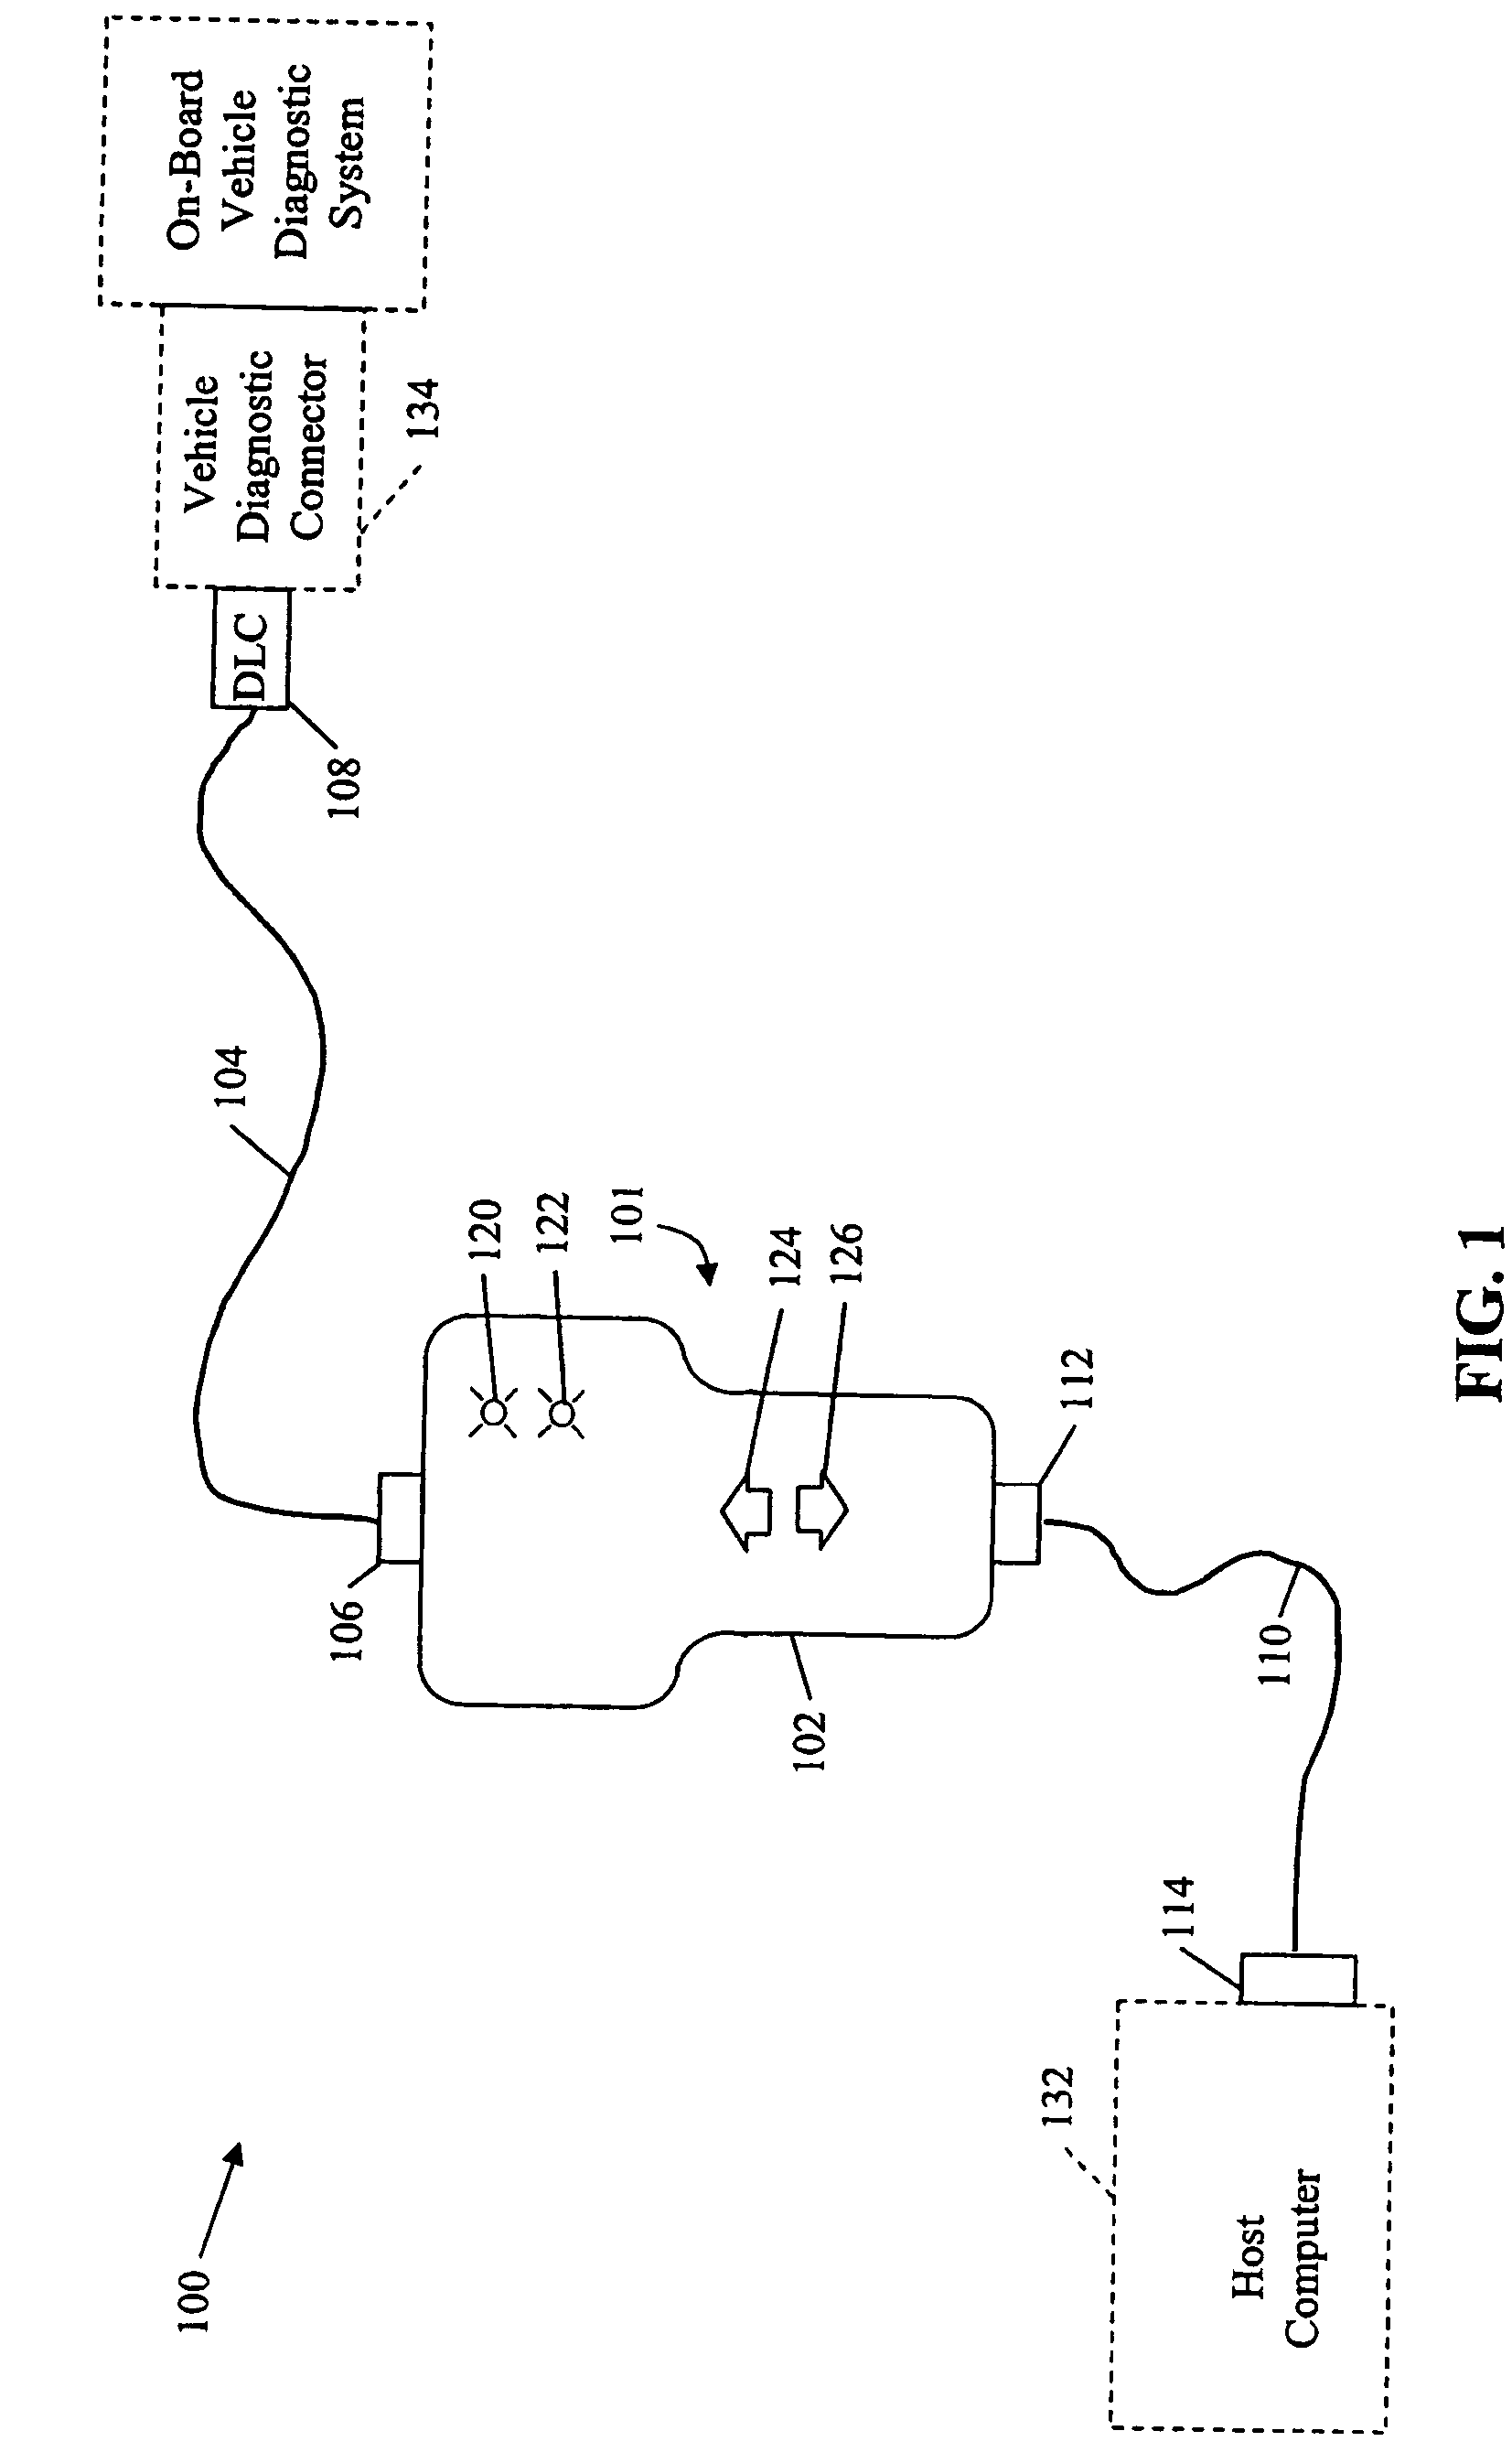 Method and system for retrieving diagnostic information from a vehicle